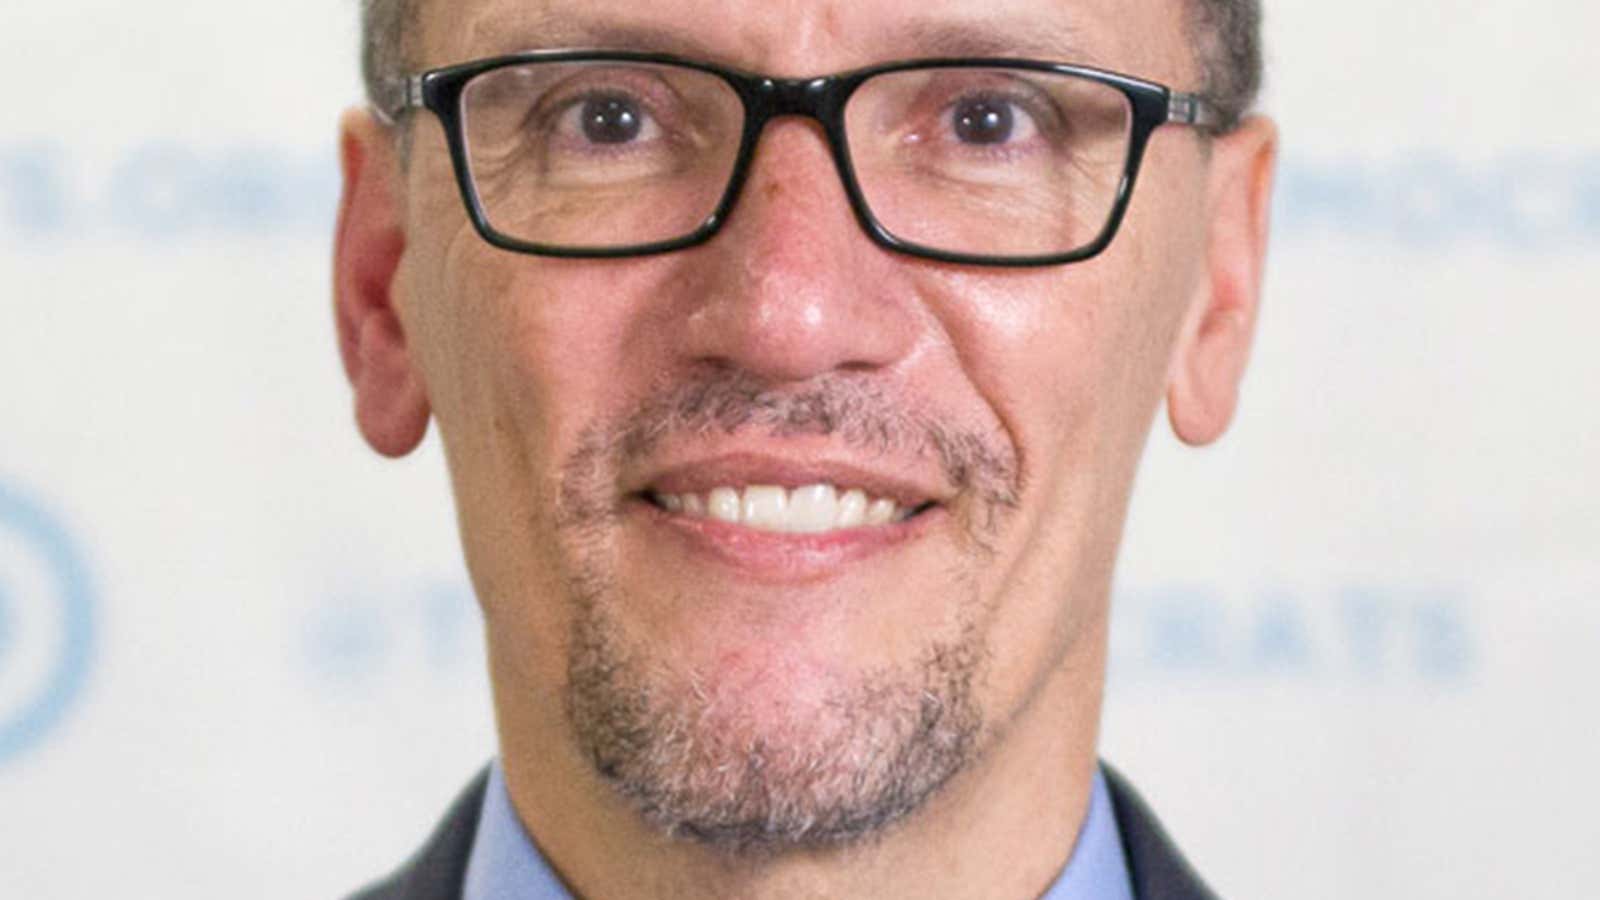 DNC chair Tom Perez suggests toxic masculinity is not a partisan issue